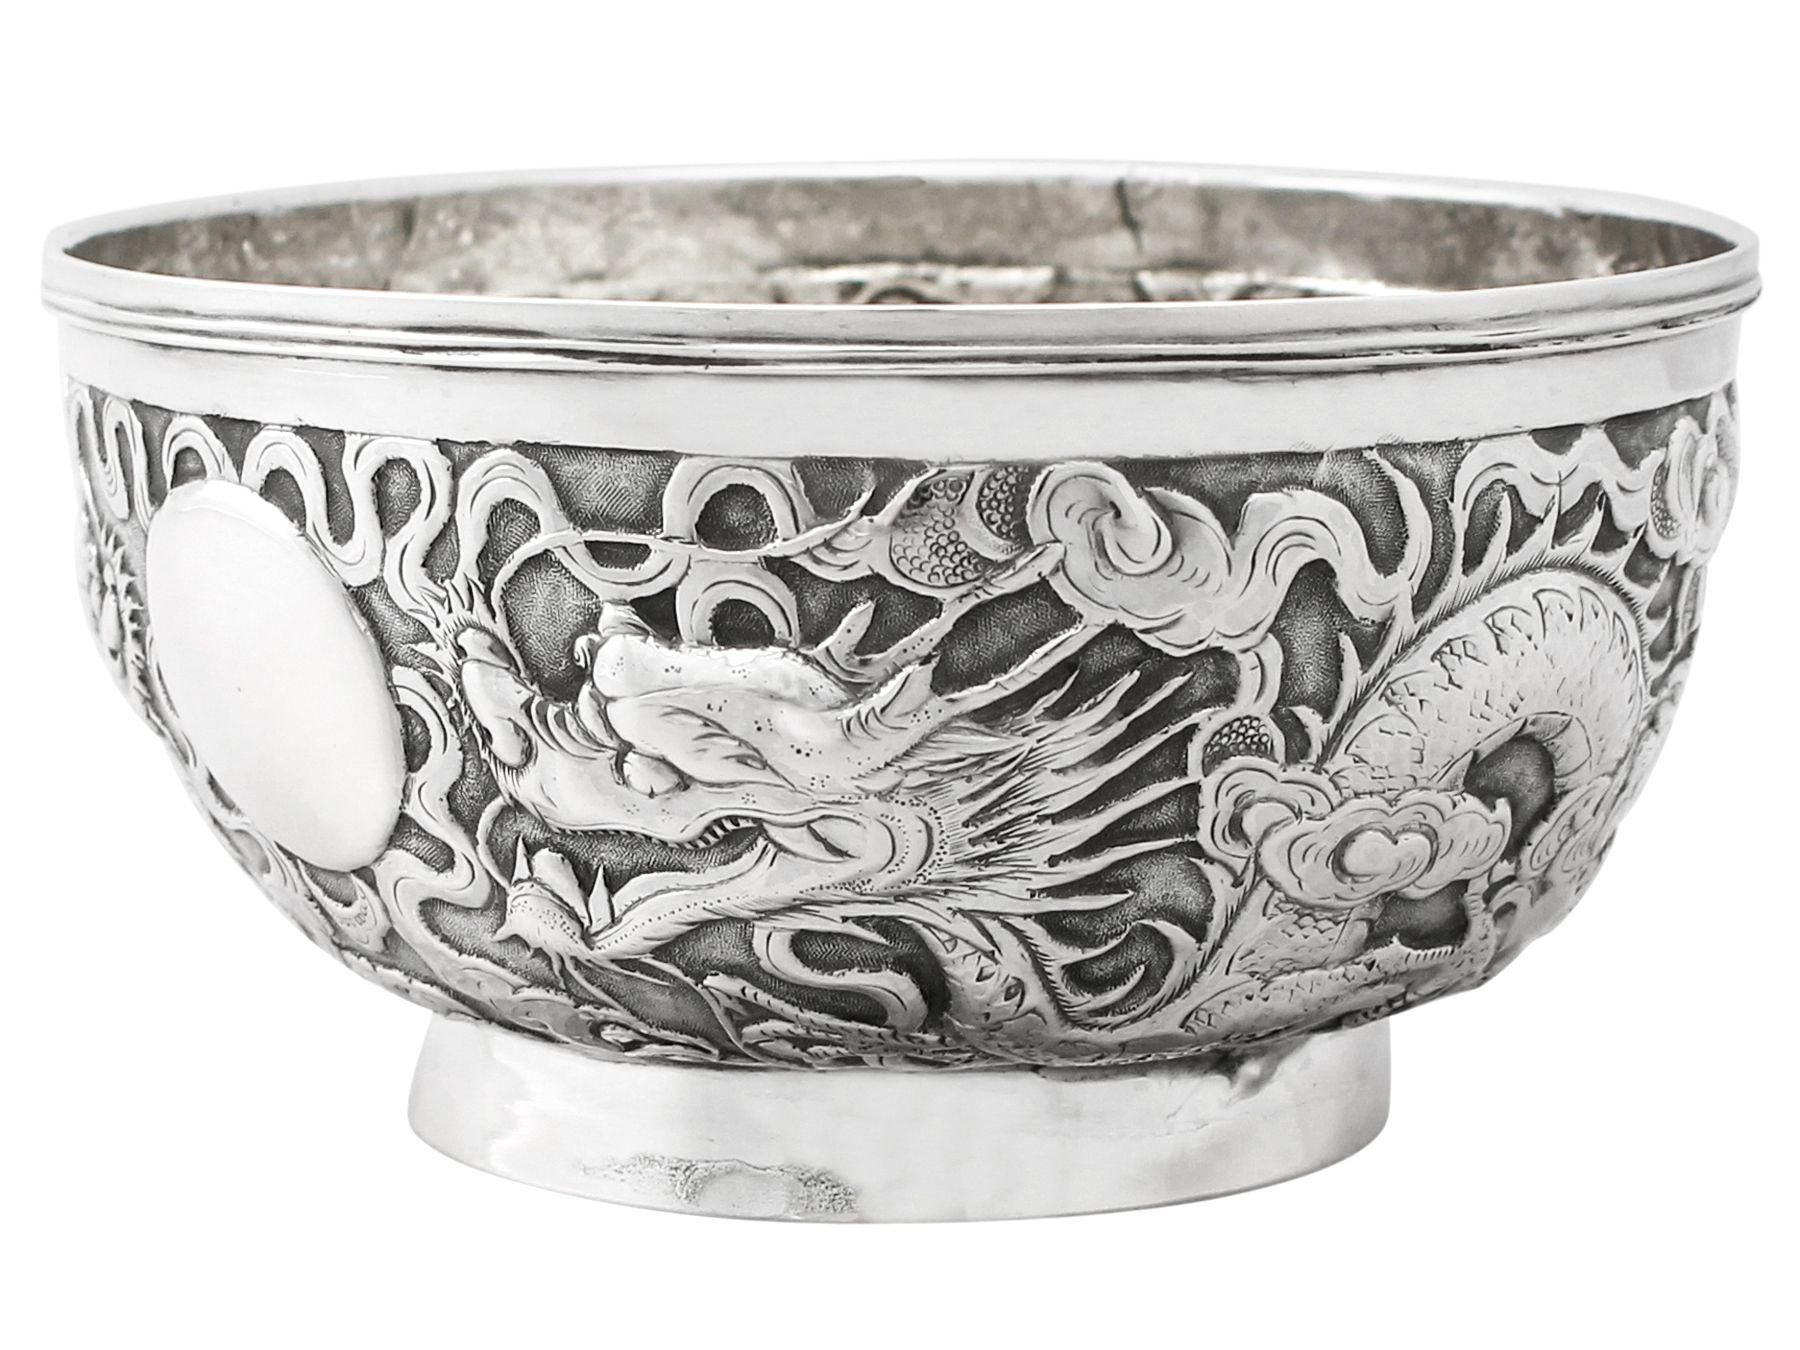 A fine and impressive antique Chinese Export Silver bowl; an addition to our Chinese/Asian silverware collection

This impressive Chinese Export Silver (CES) bowl has a plain circular form onto a plain collet foot.

The body of this antique Chinese